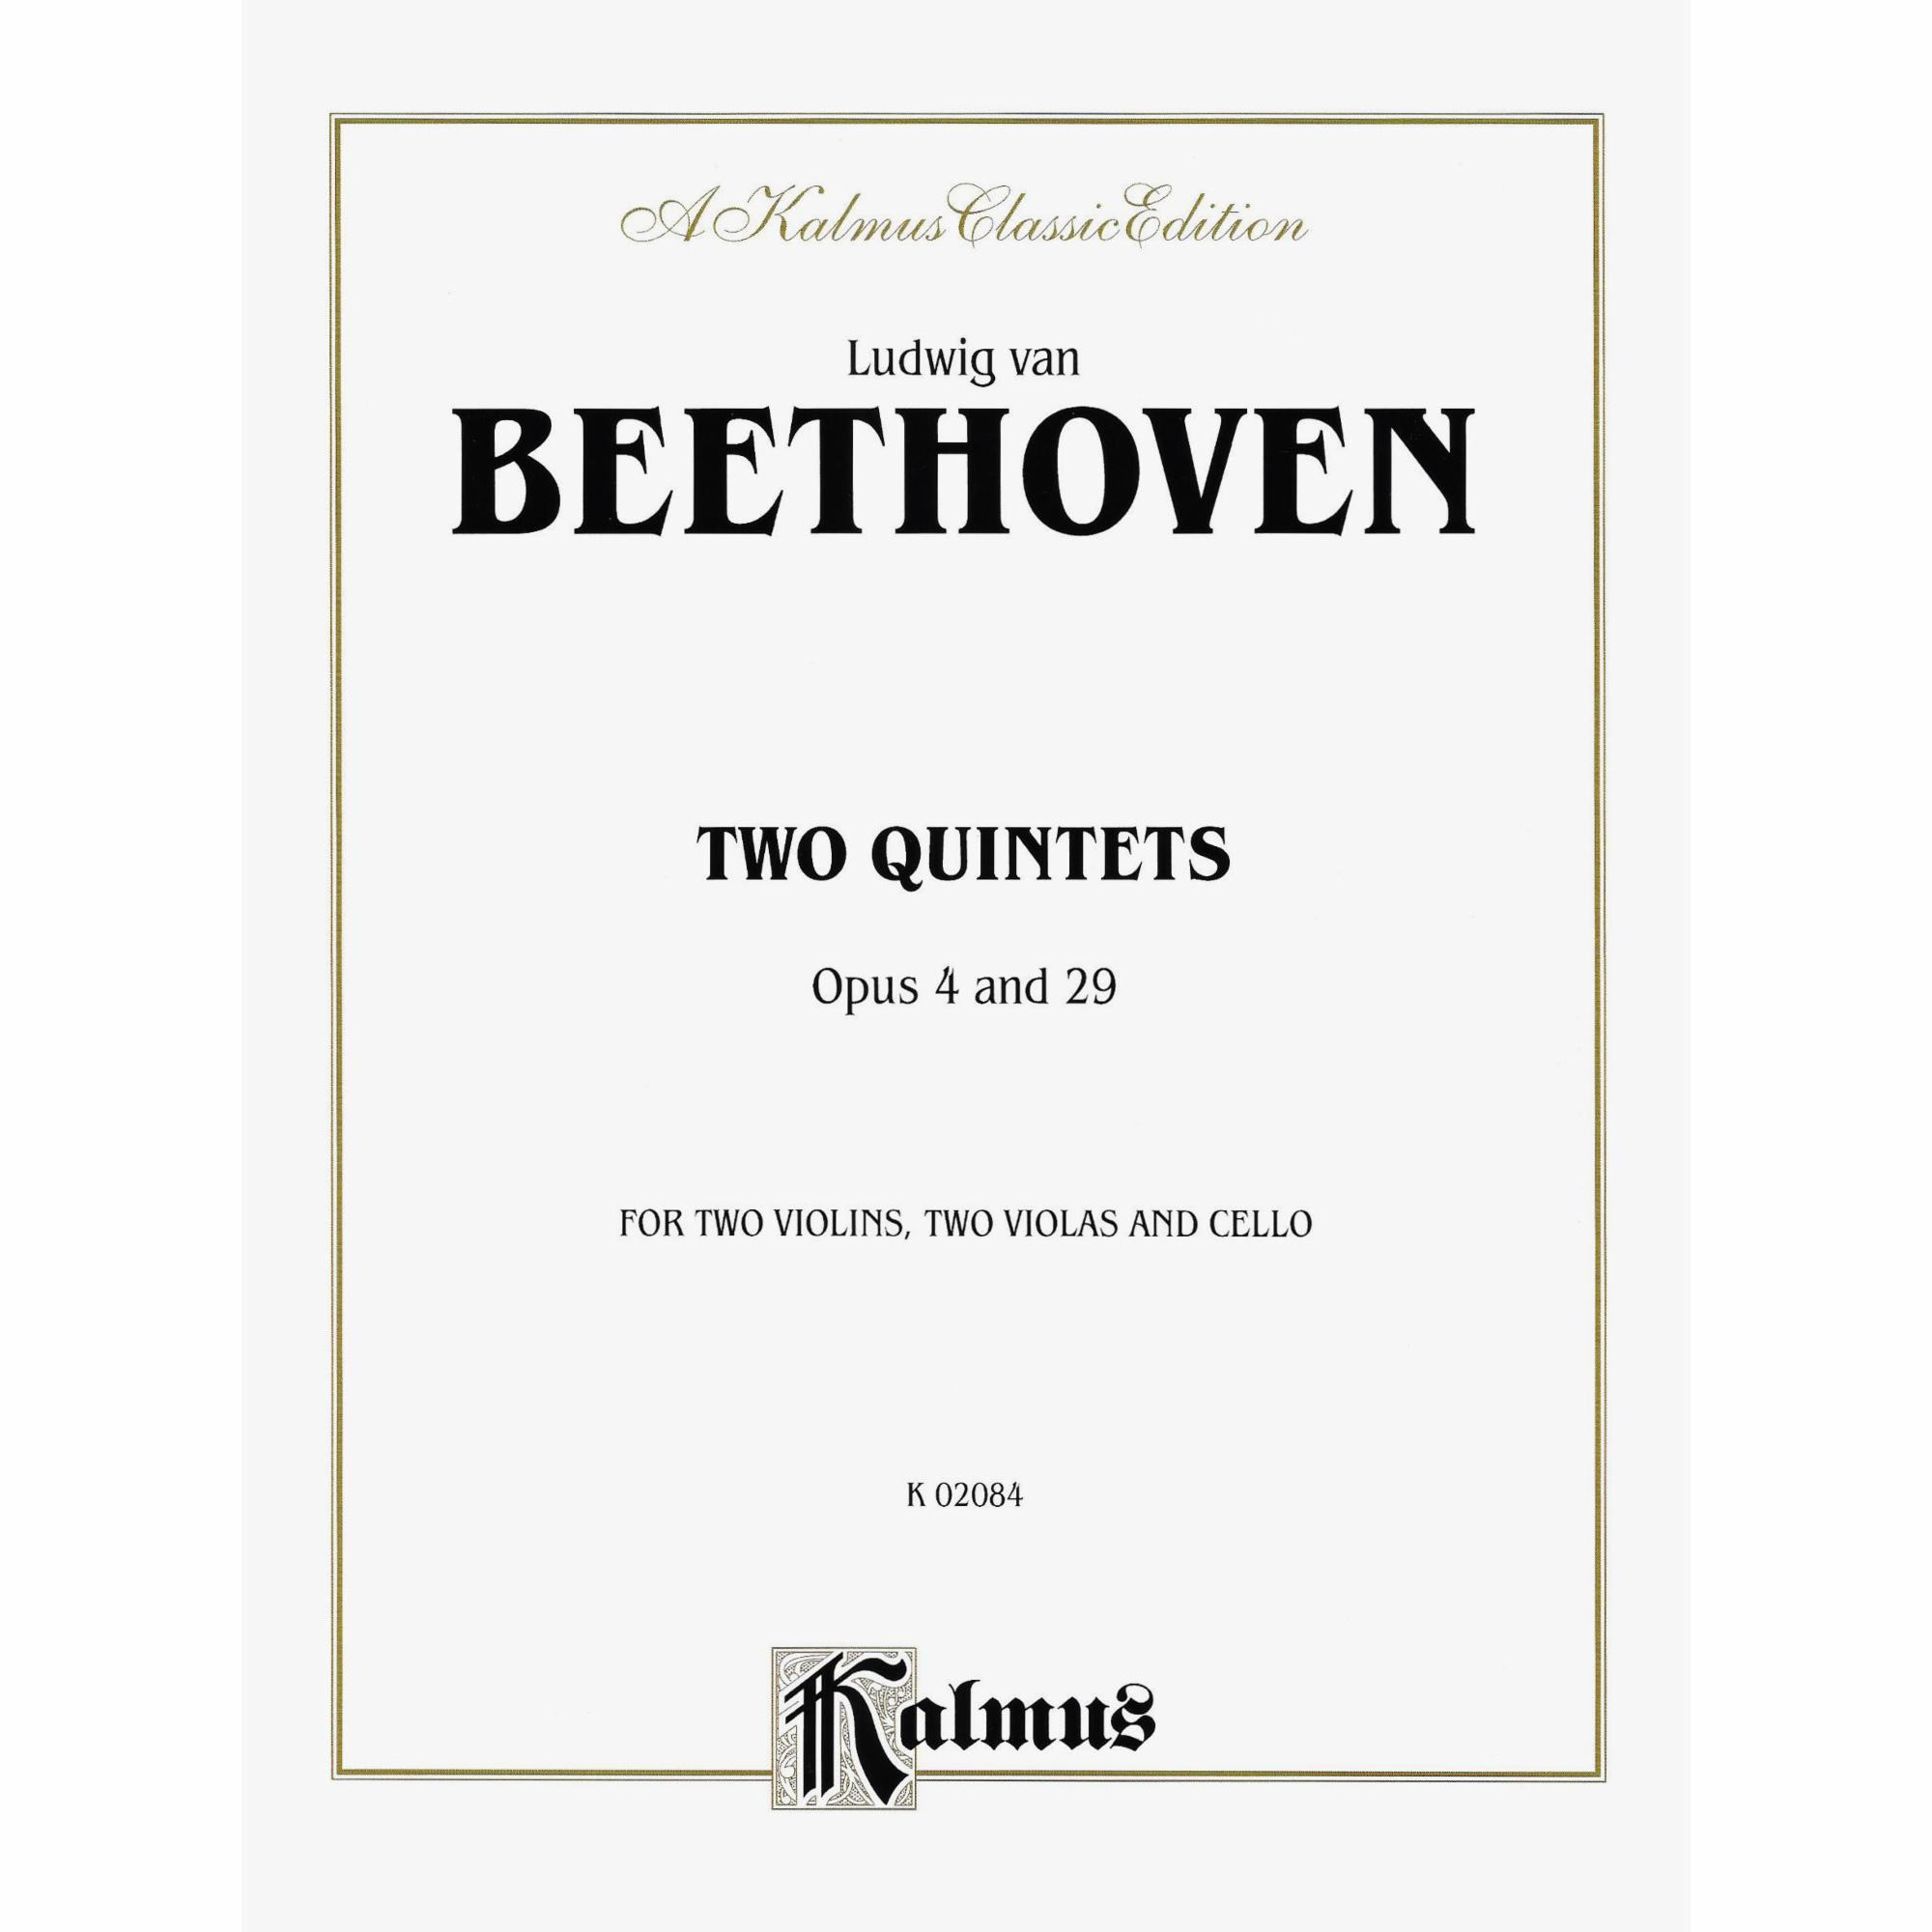 Beethoven -- Two Quintets, Opp. 4 & 29